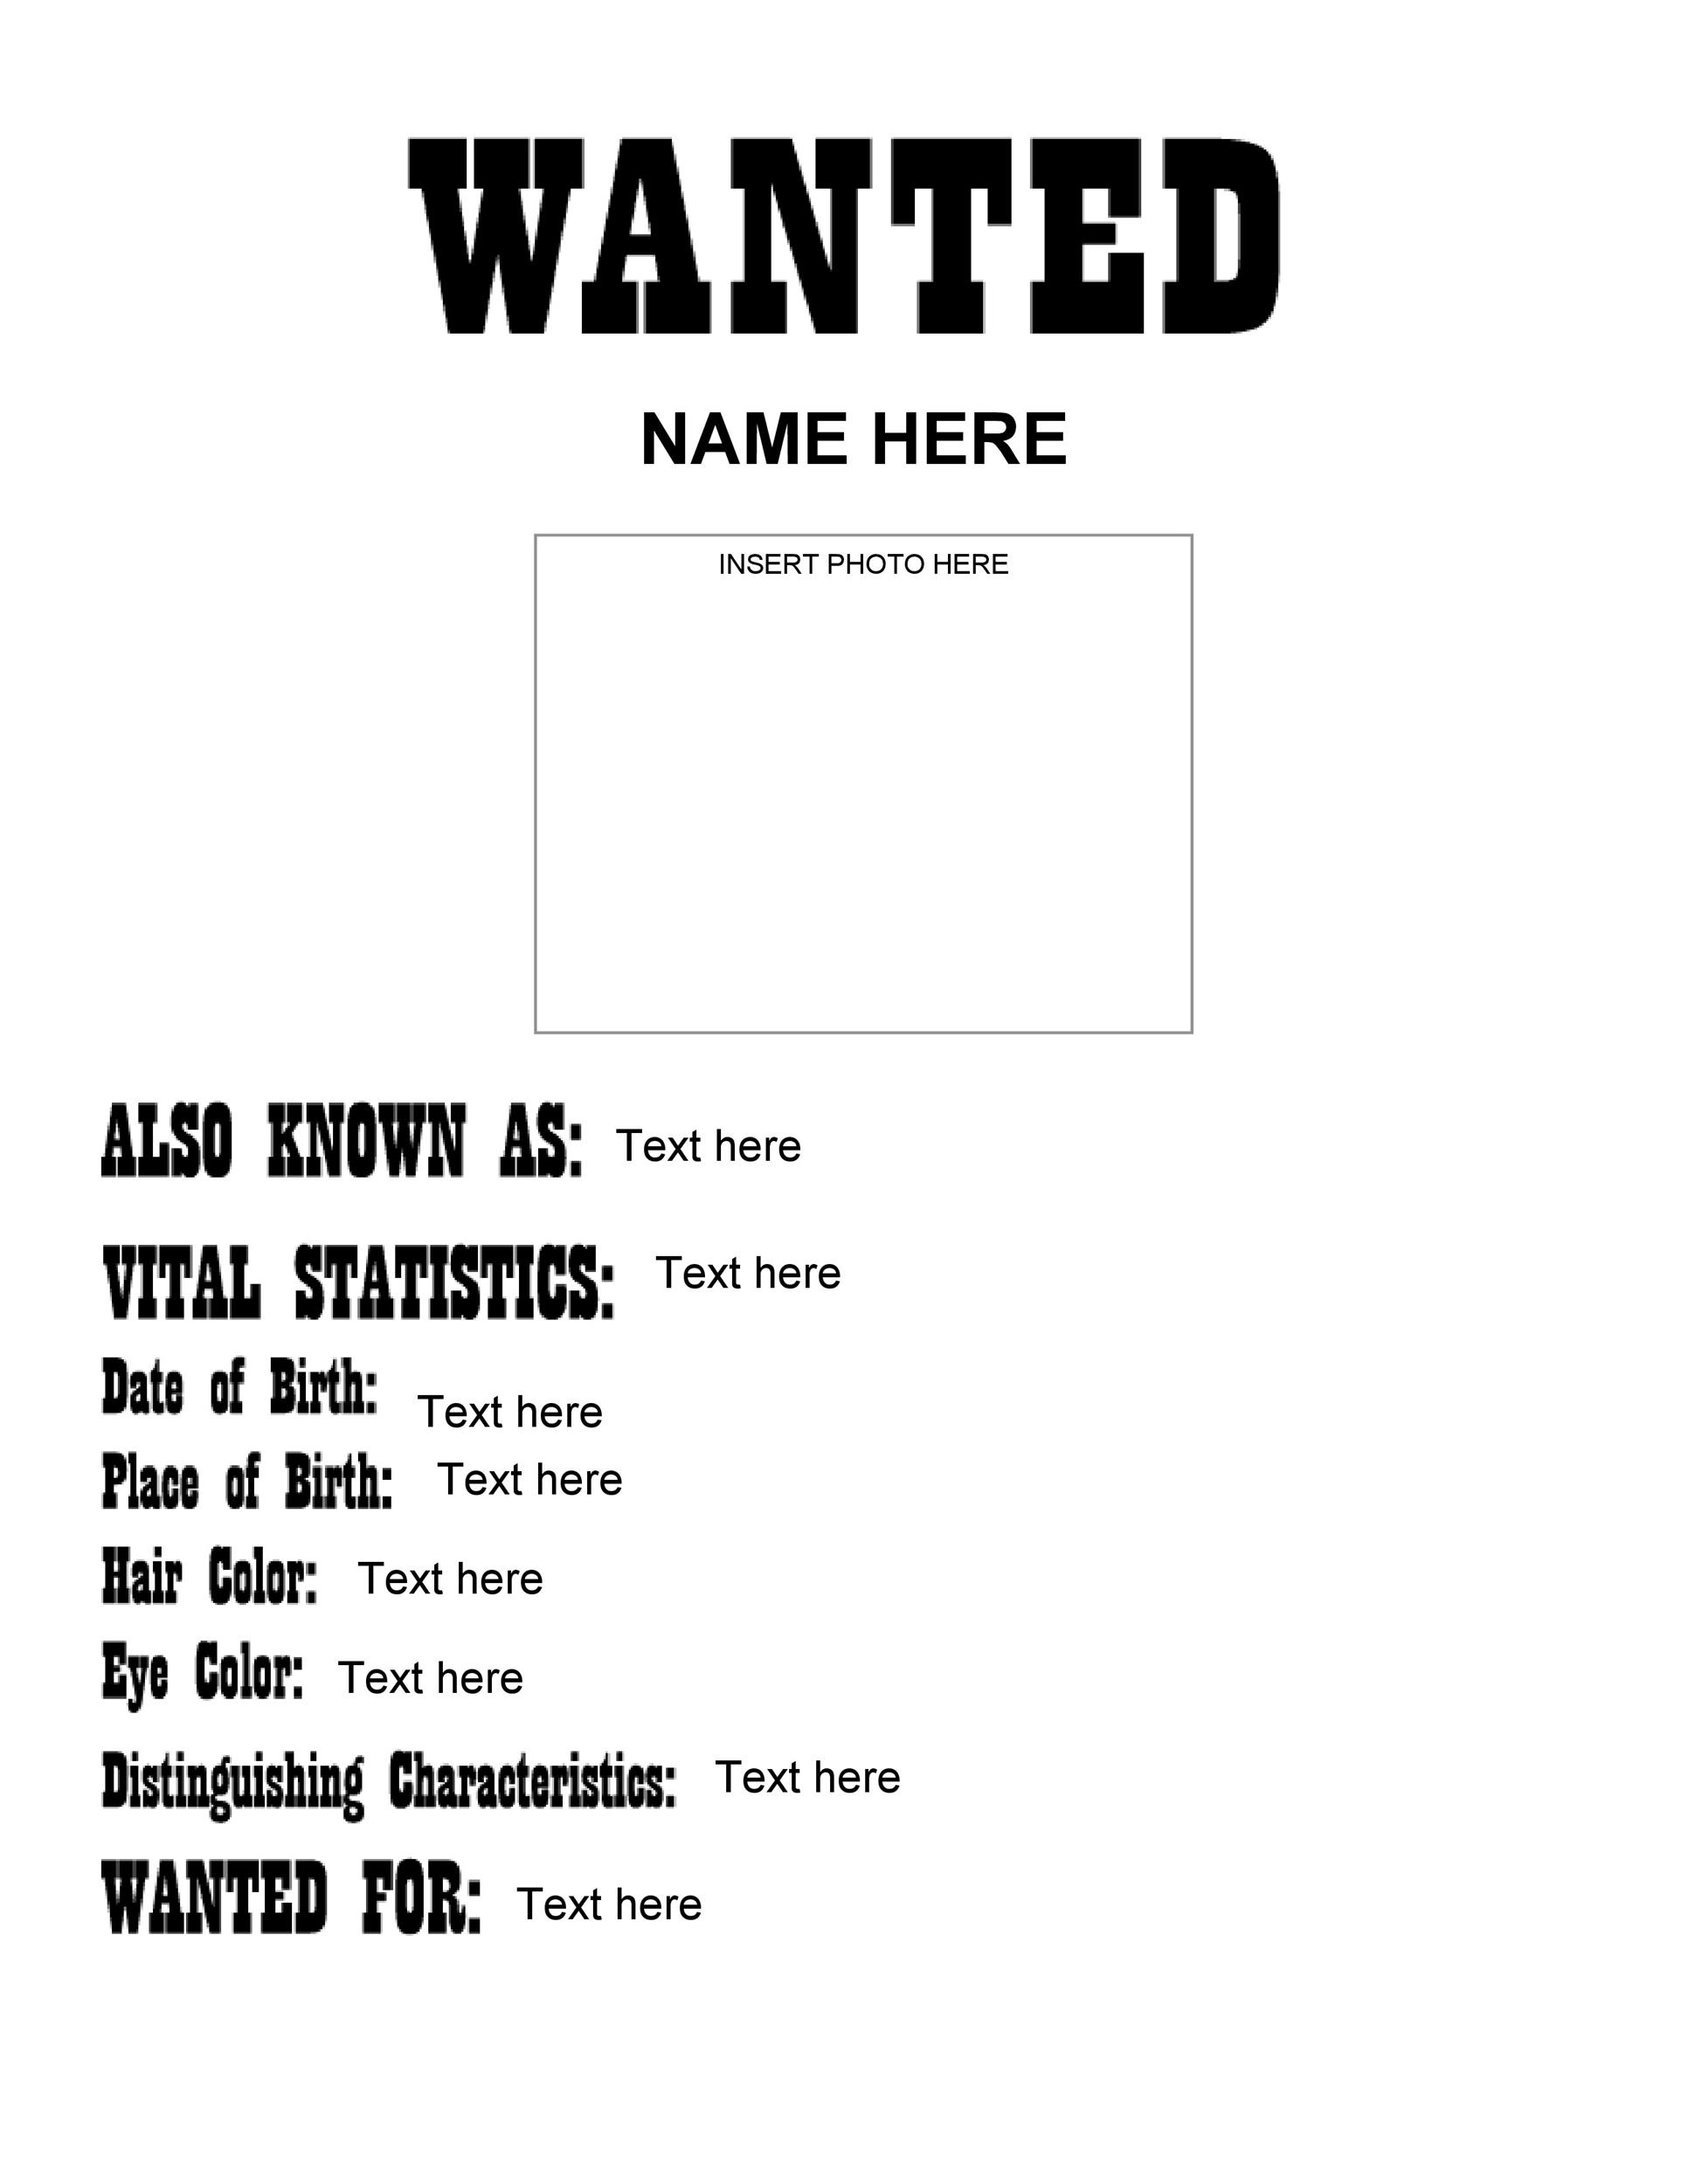 Microsoft Office Help Wanted Template